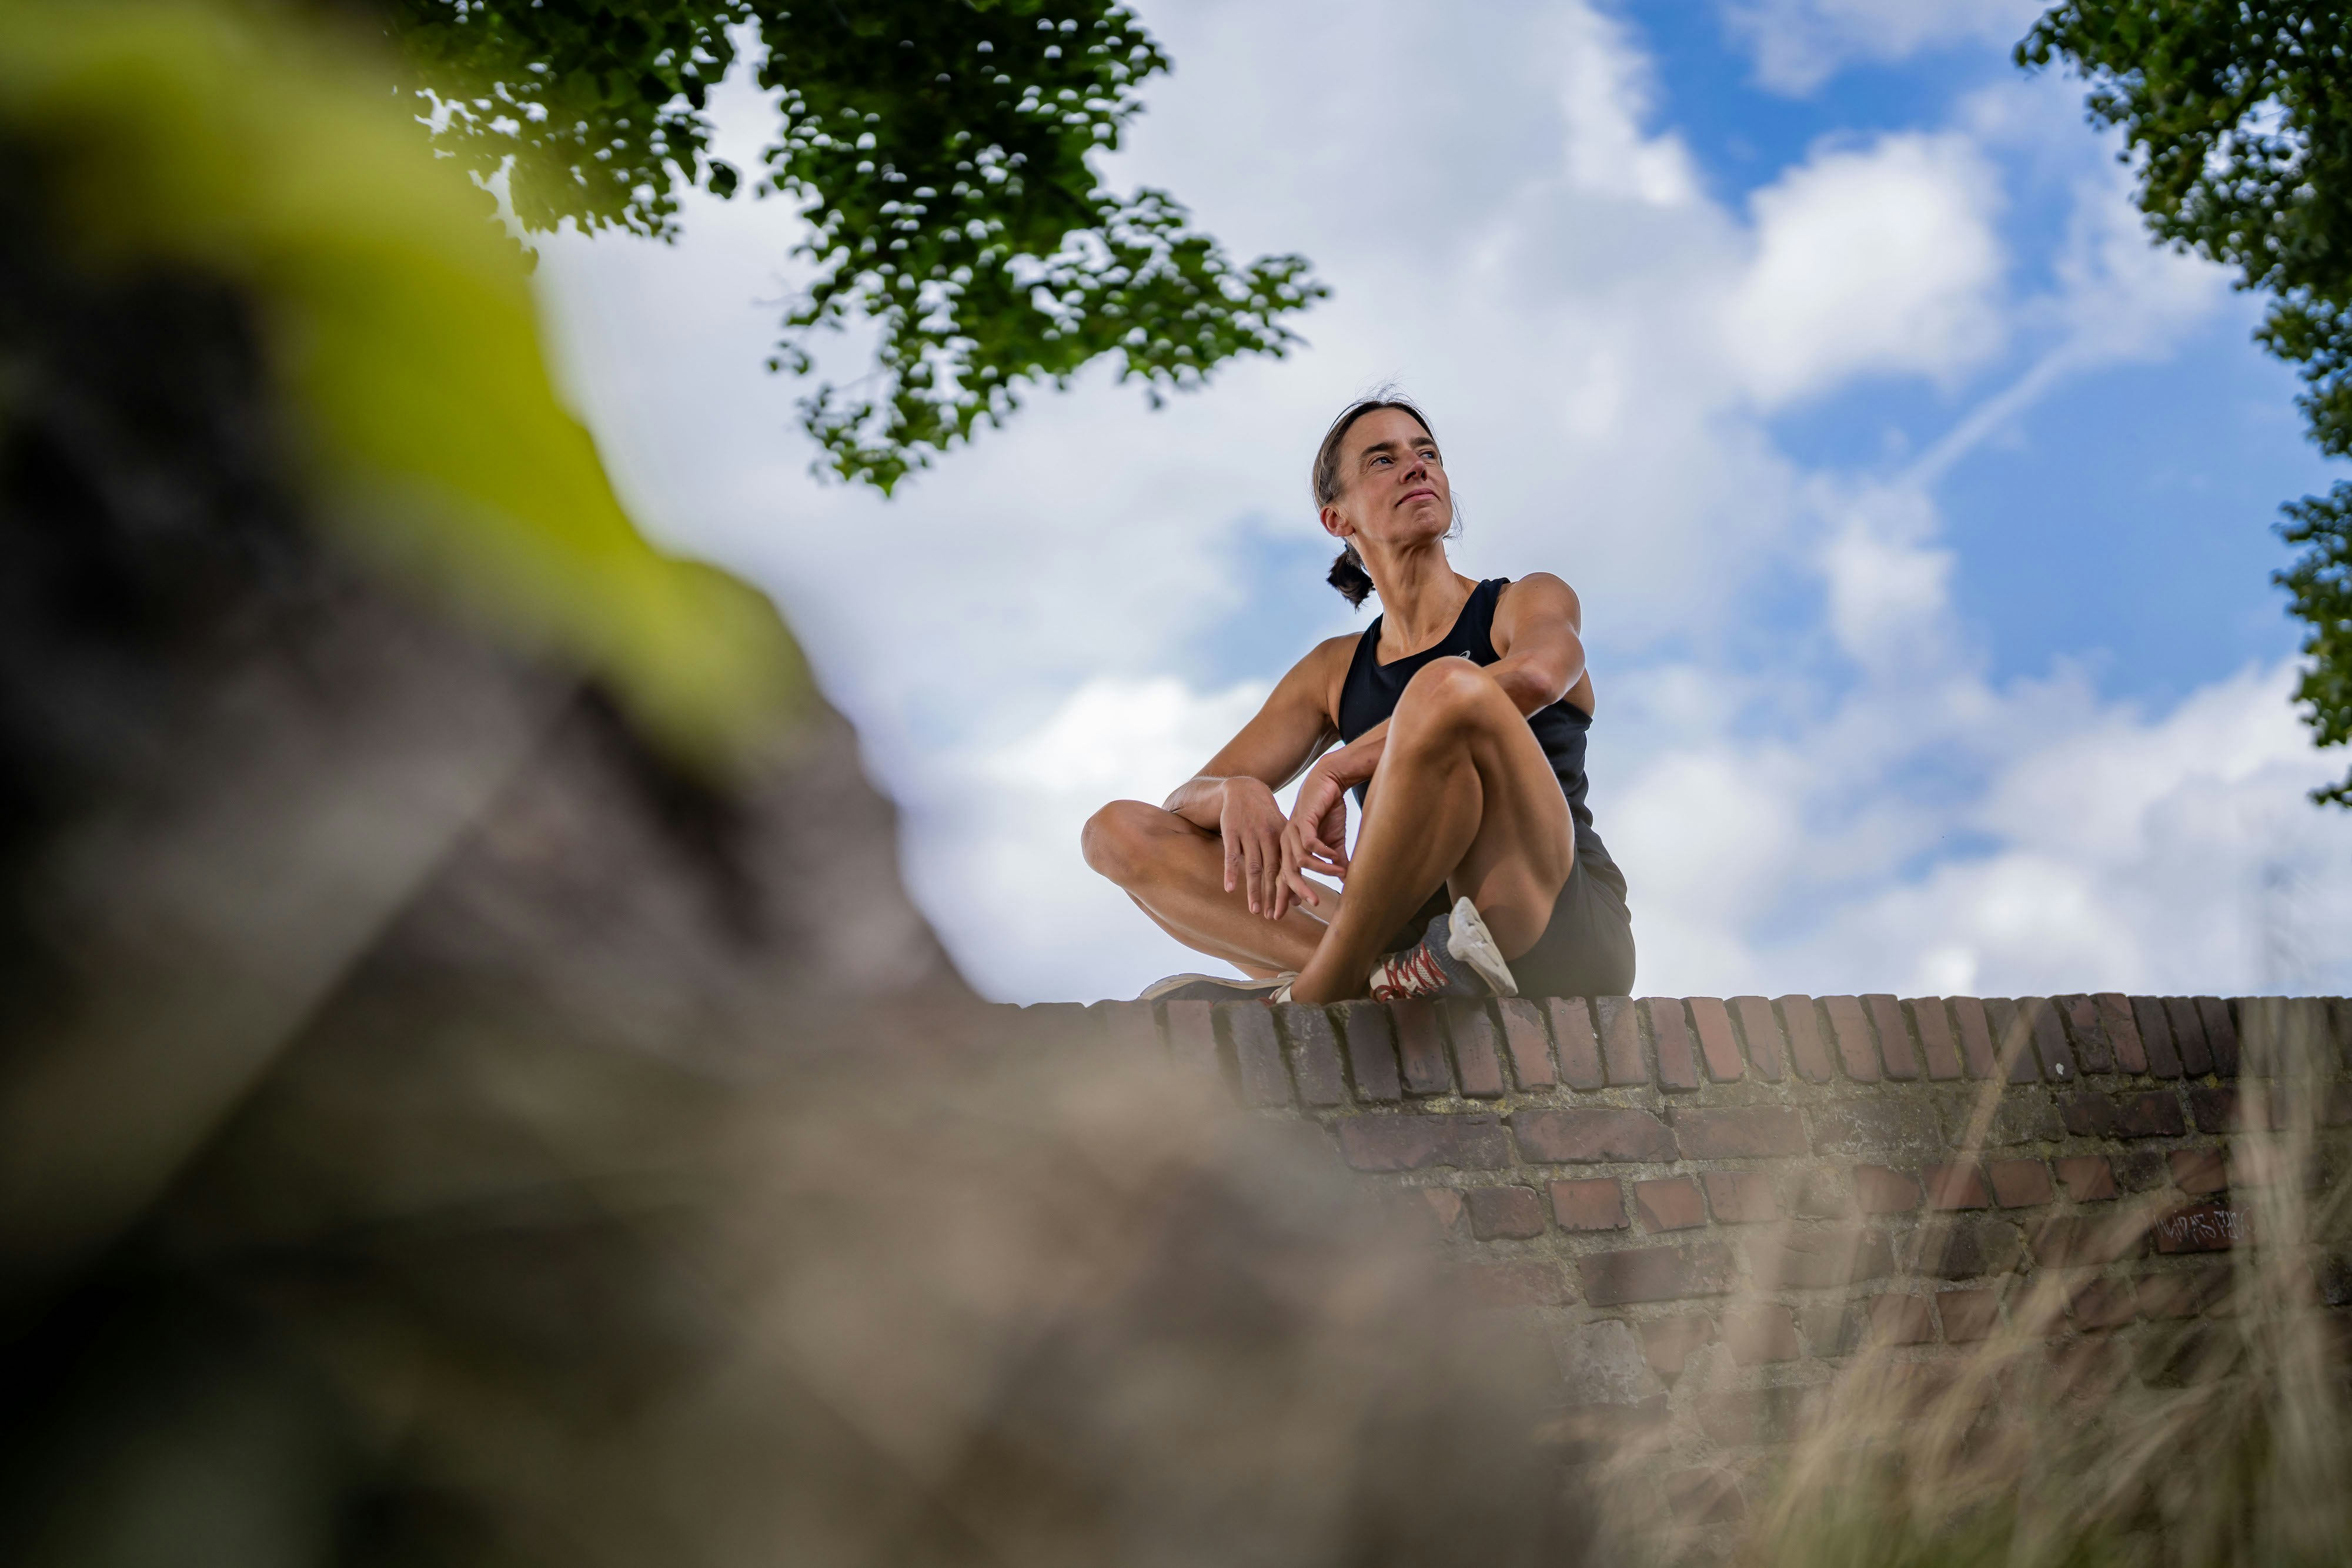 Claudia sitting on a wall in running outfit